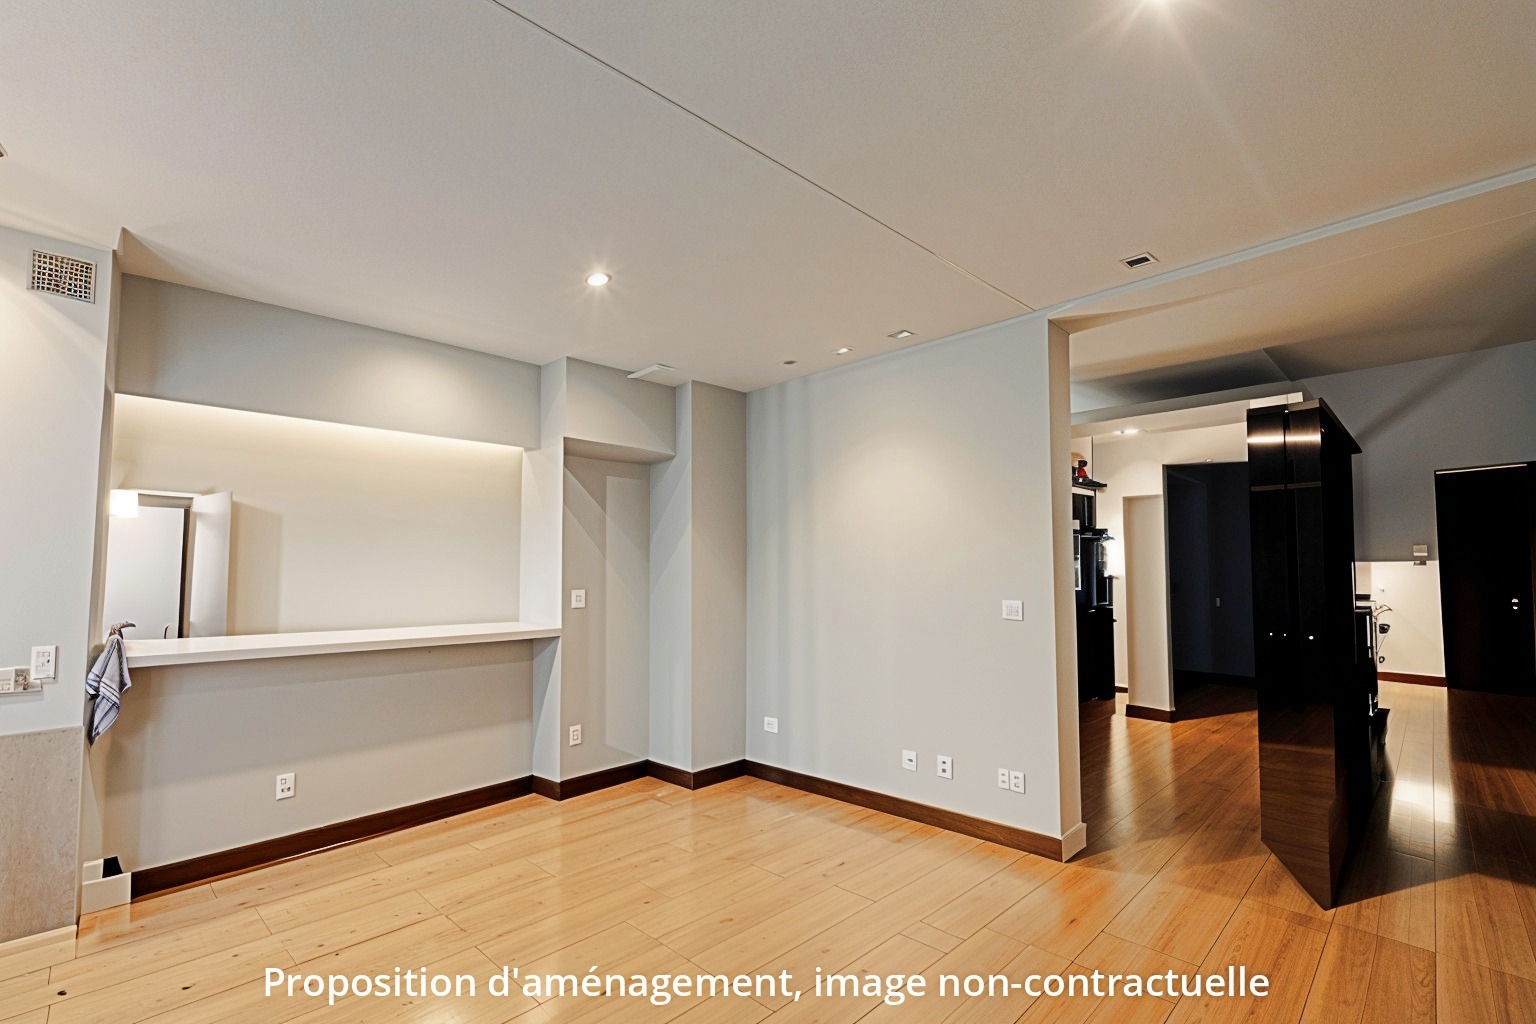 Exceptional opportunity: assignment of the lease in Montmartre 1